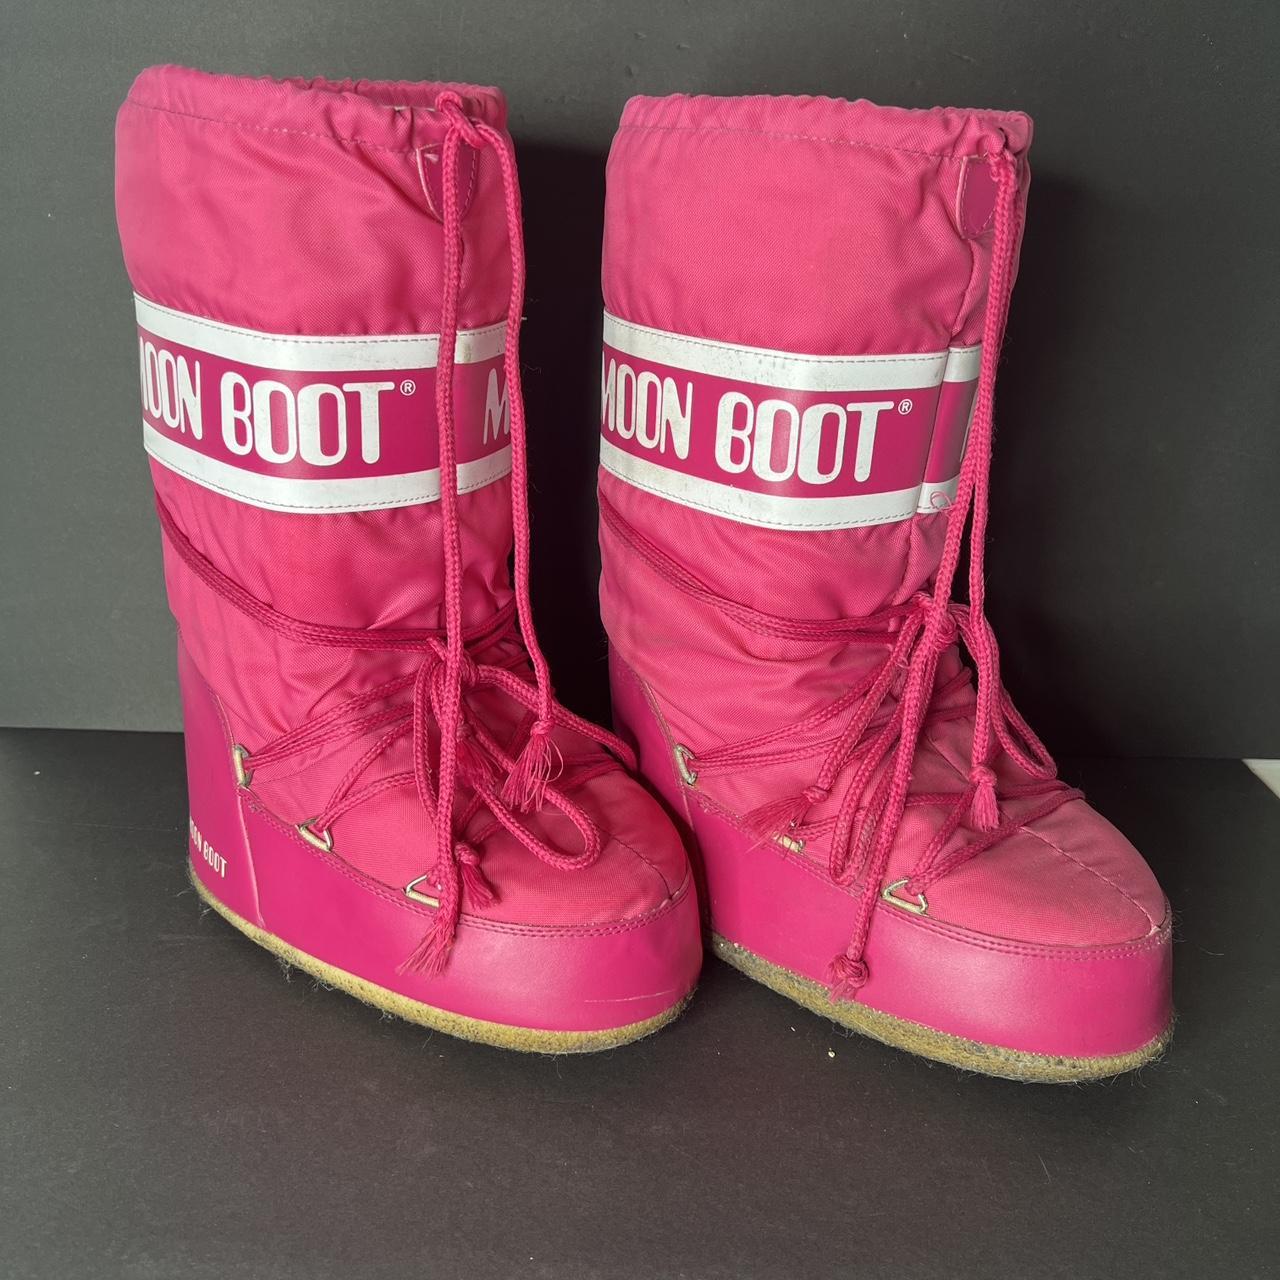 ICON LOW HOT-PINK NYLON BOOTS